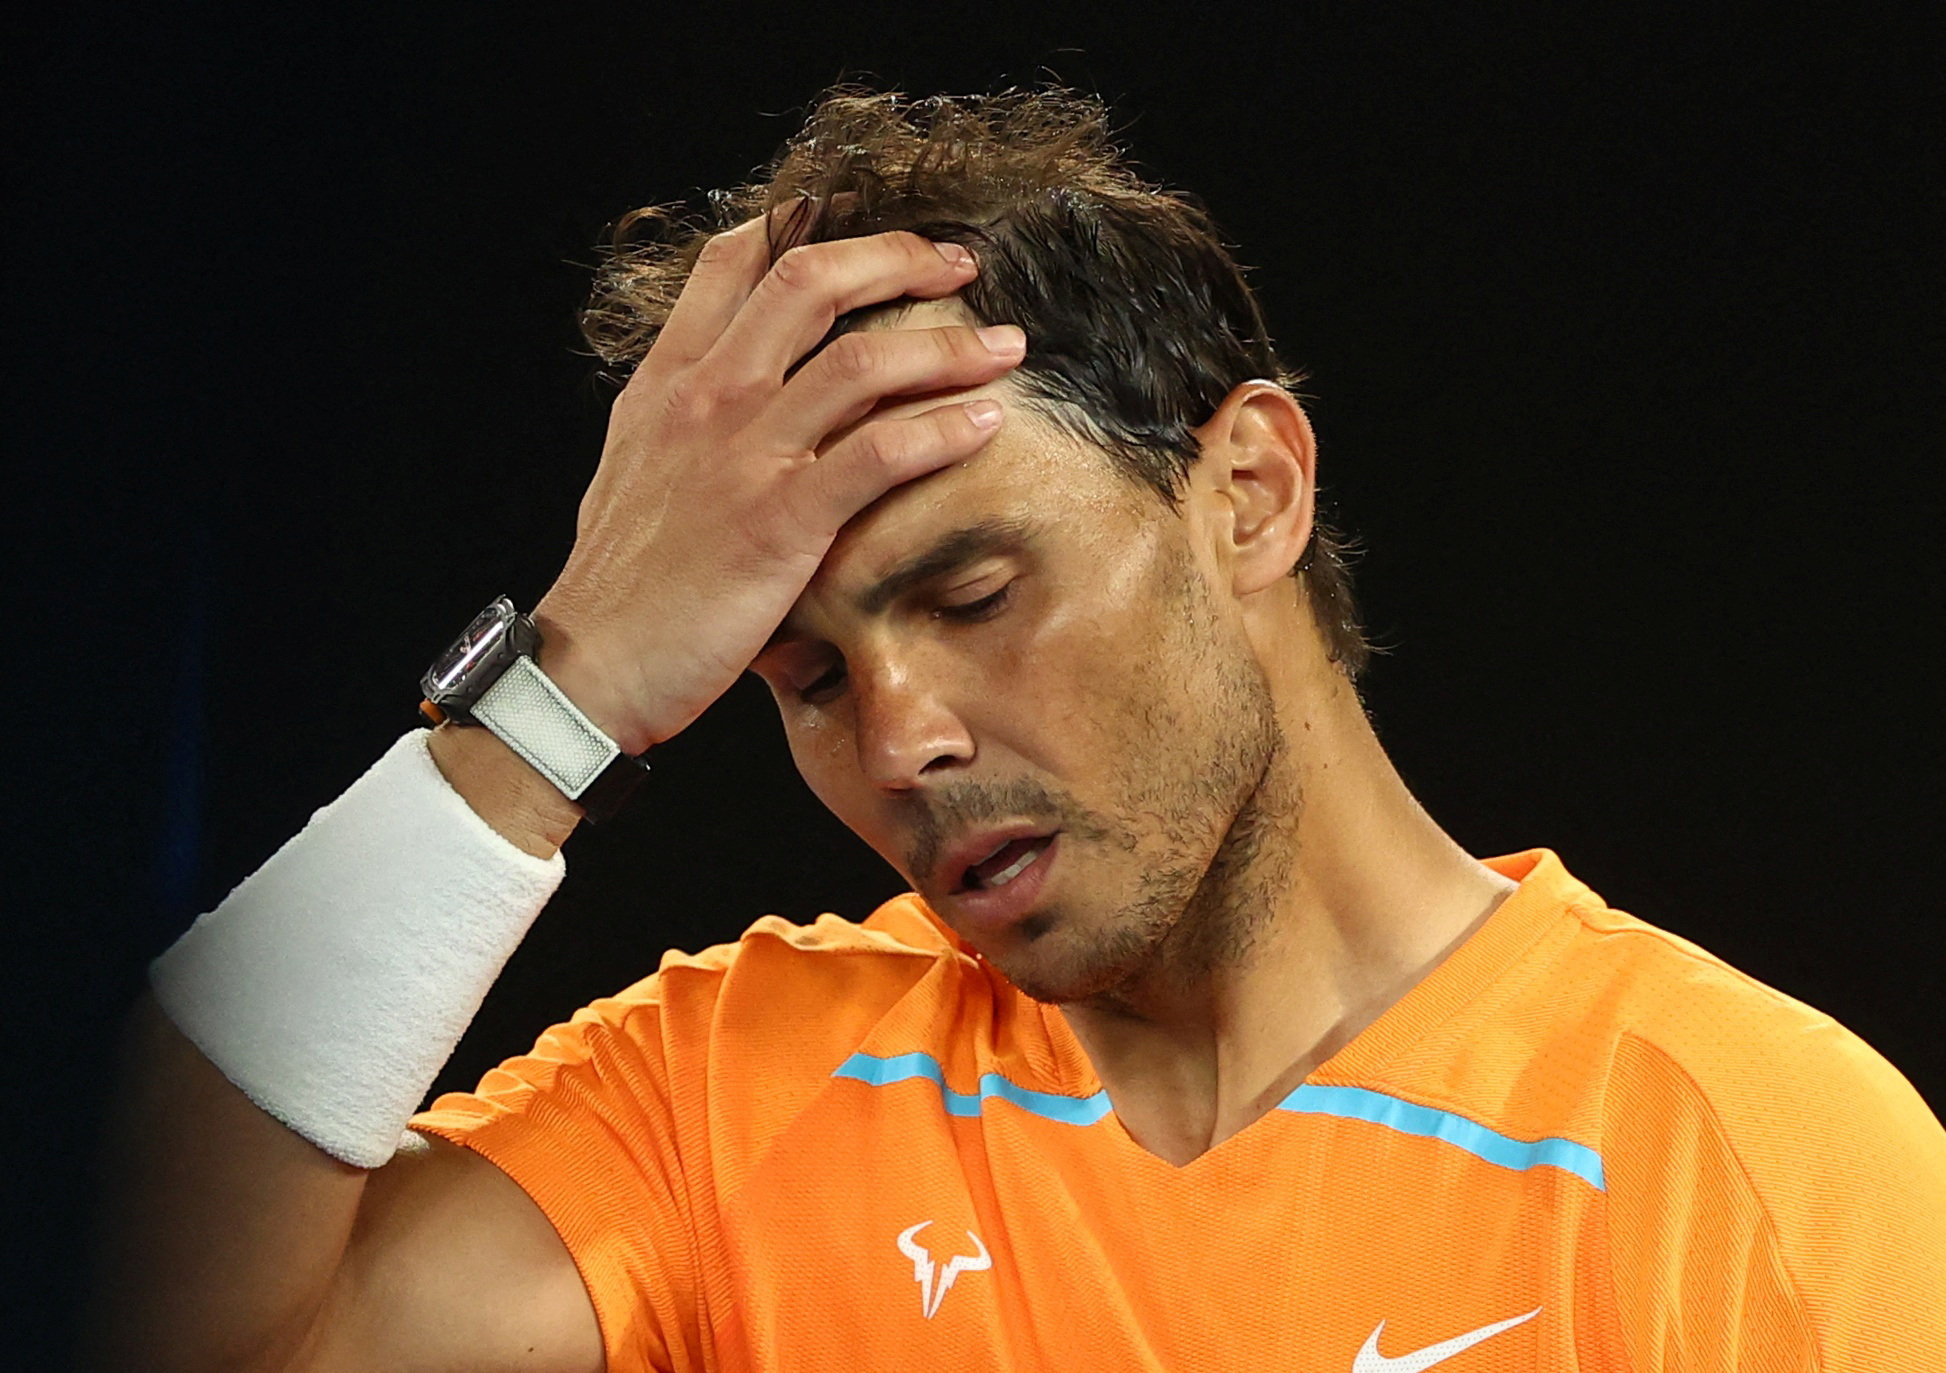 Rafael Nadal to miss French Open for first time as injury woes continue